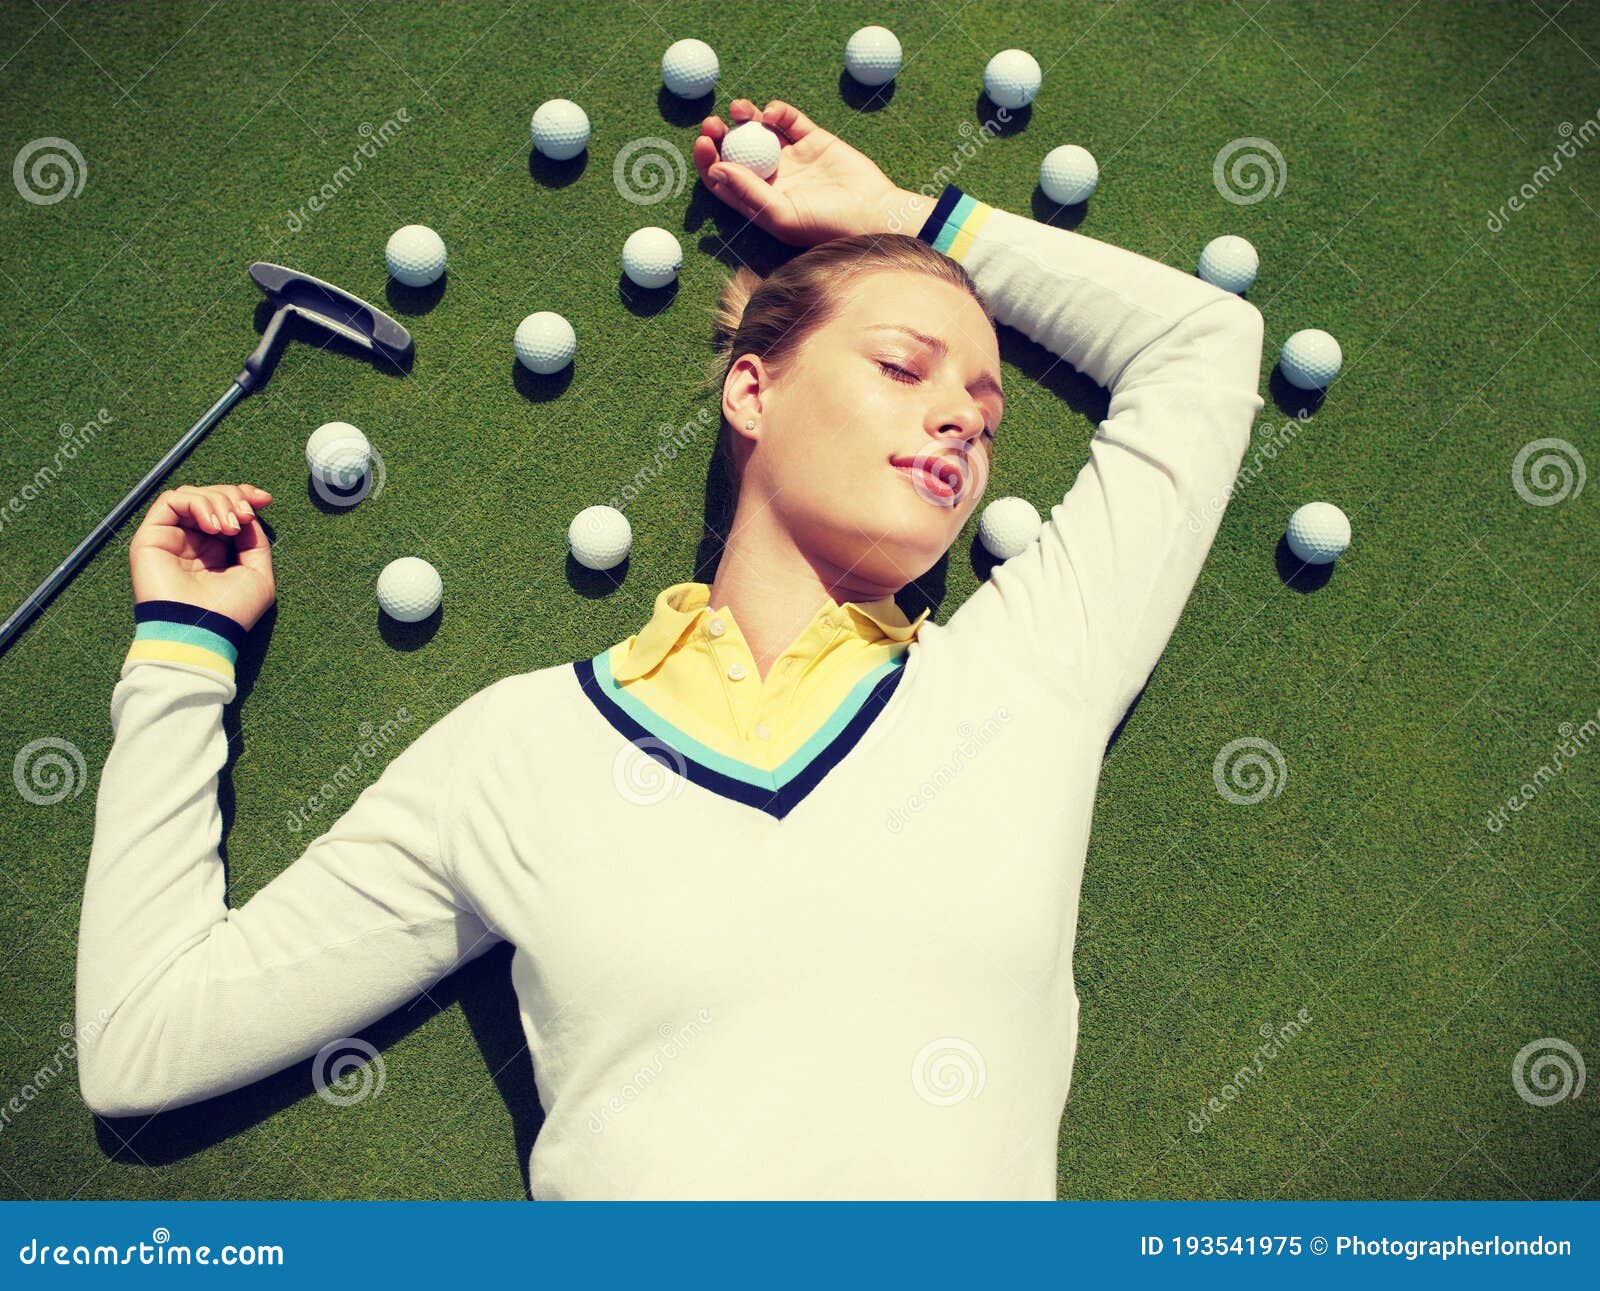 Young Beautiful Woman Lying on Fairway with Golf Balls Stock Image ...